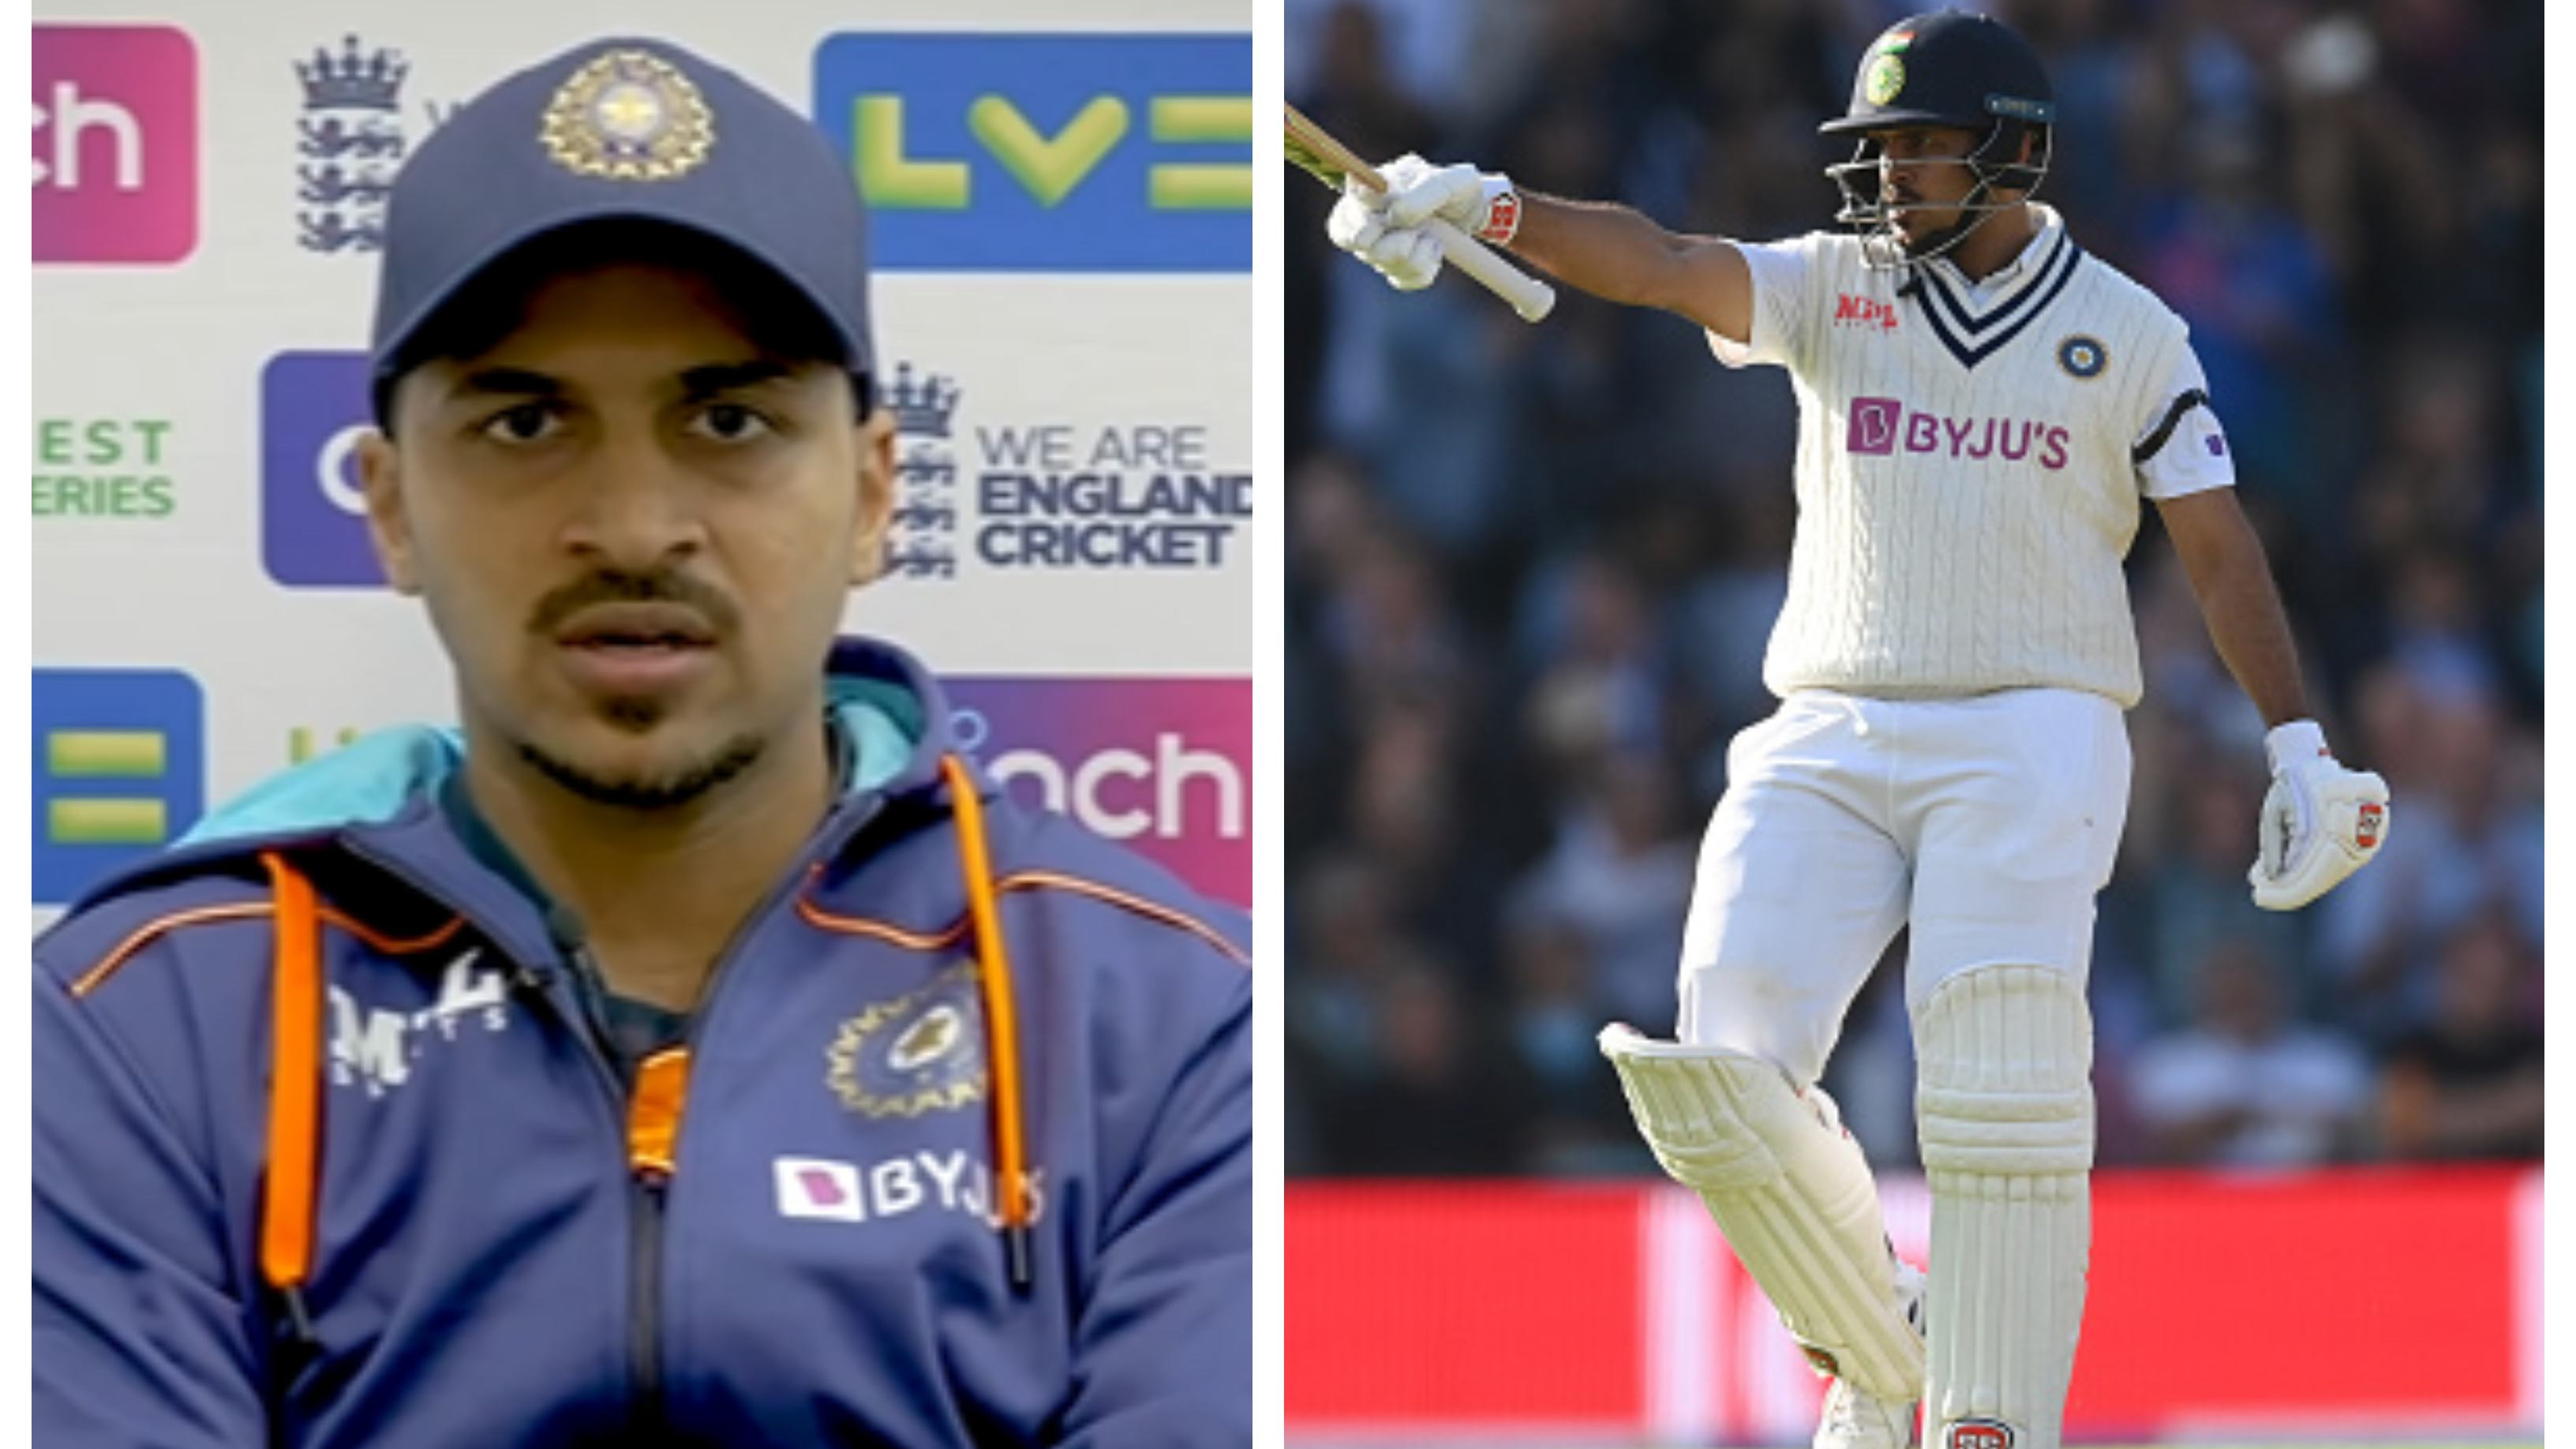 ENG v IND 2021: Perform by hook or crook, Shardul Thakur after his record-breaking fifty in 4th Test